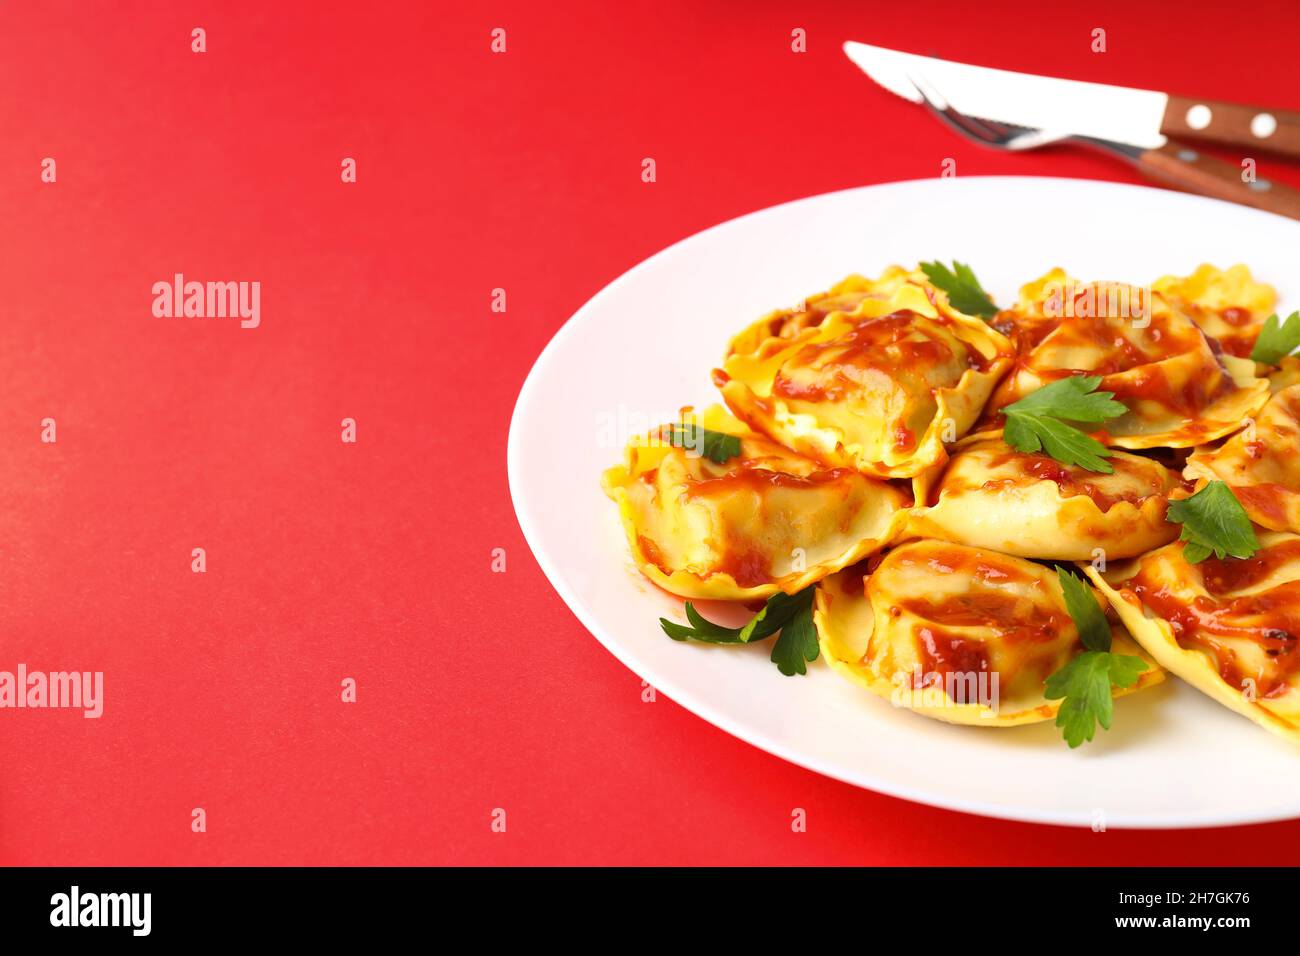 Delicious food concept with ravioli on red background Stock Photo